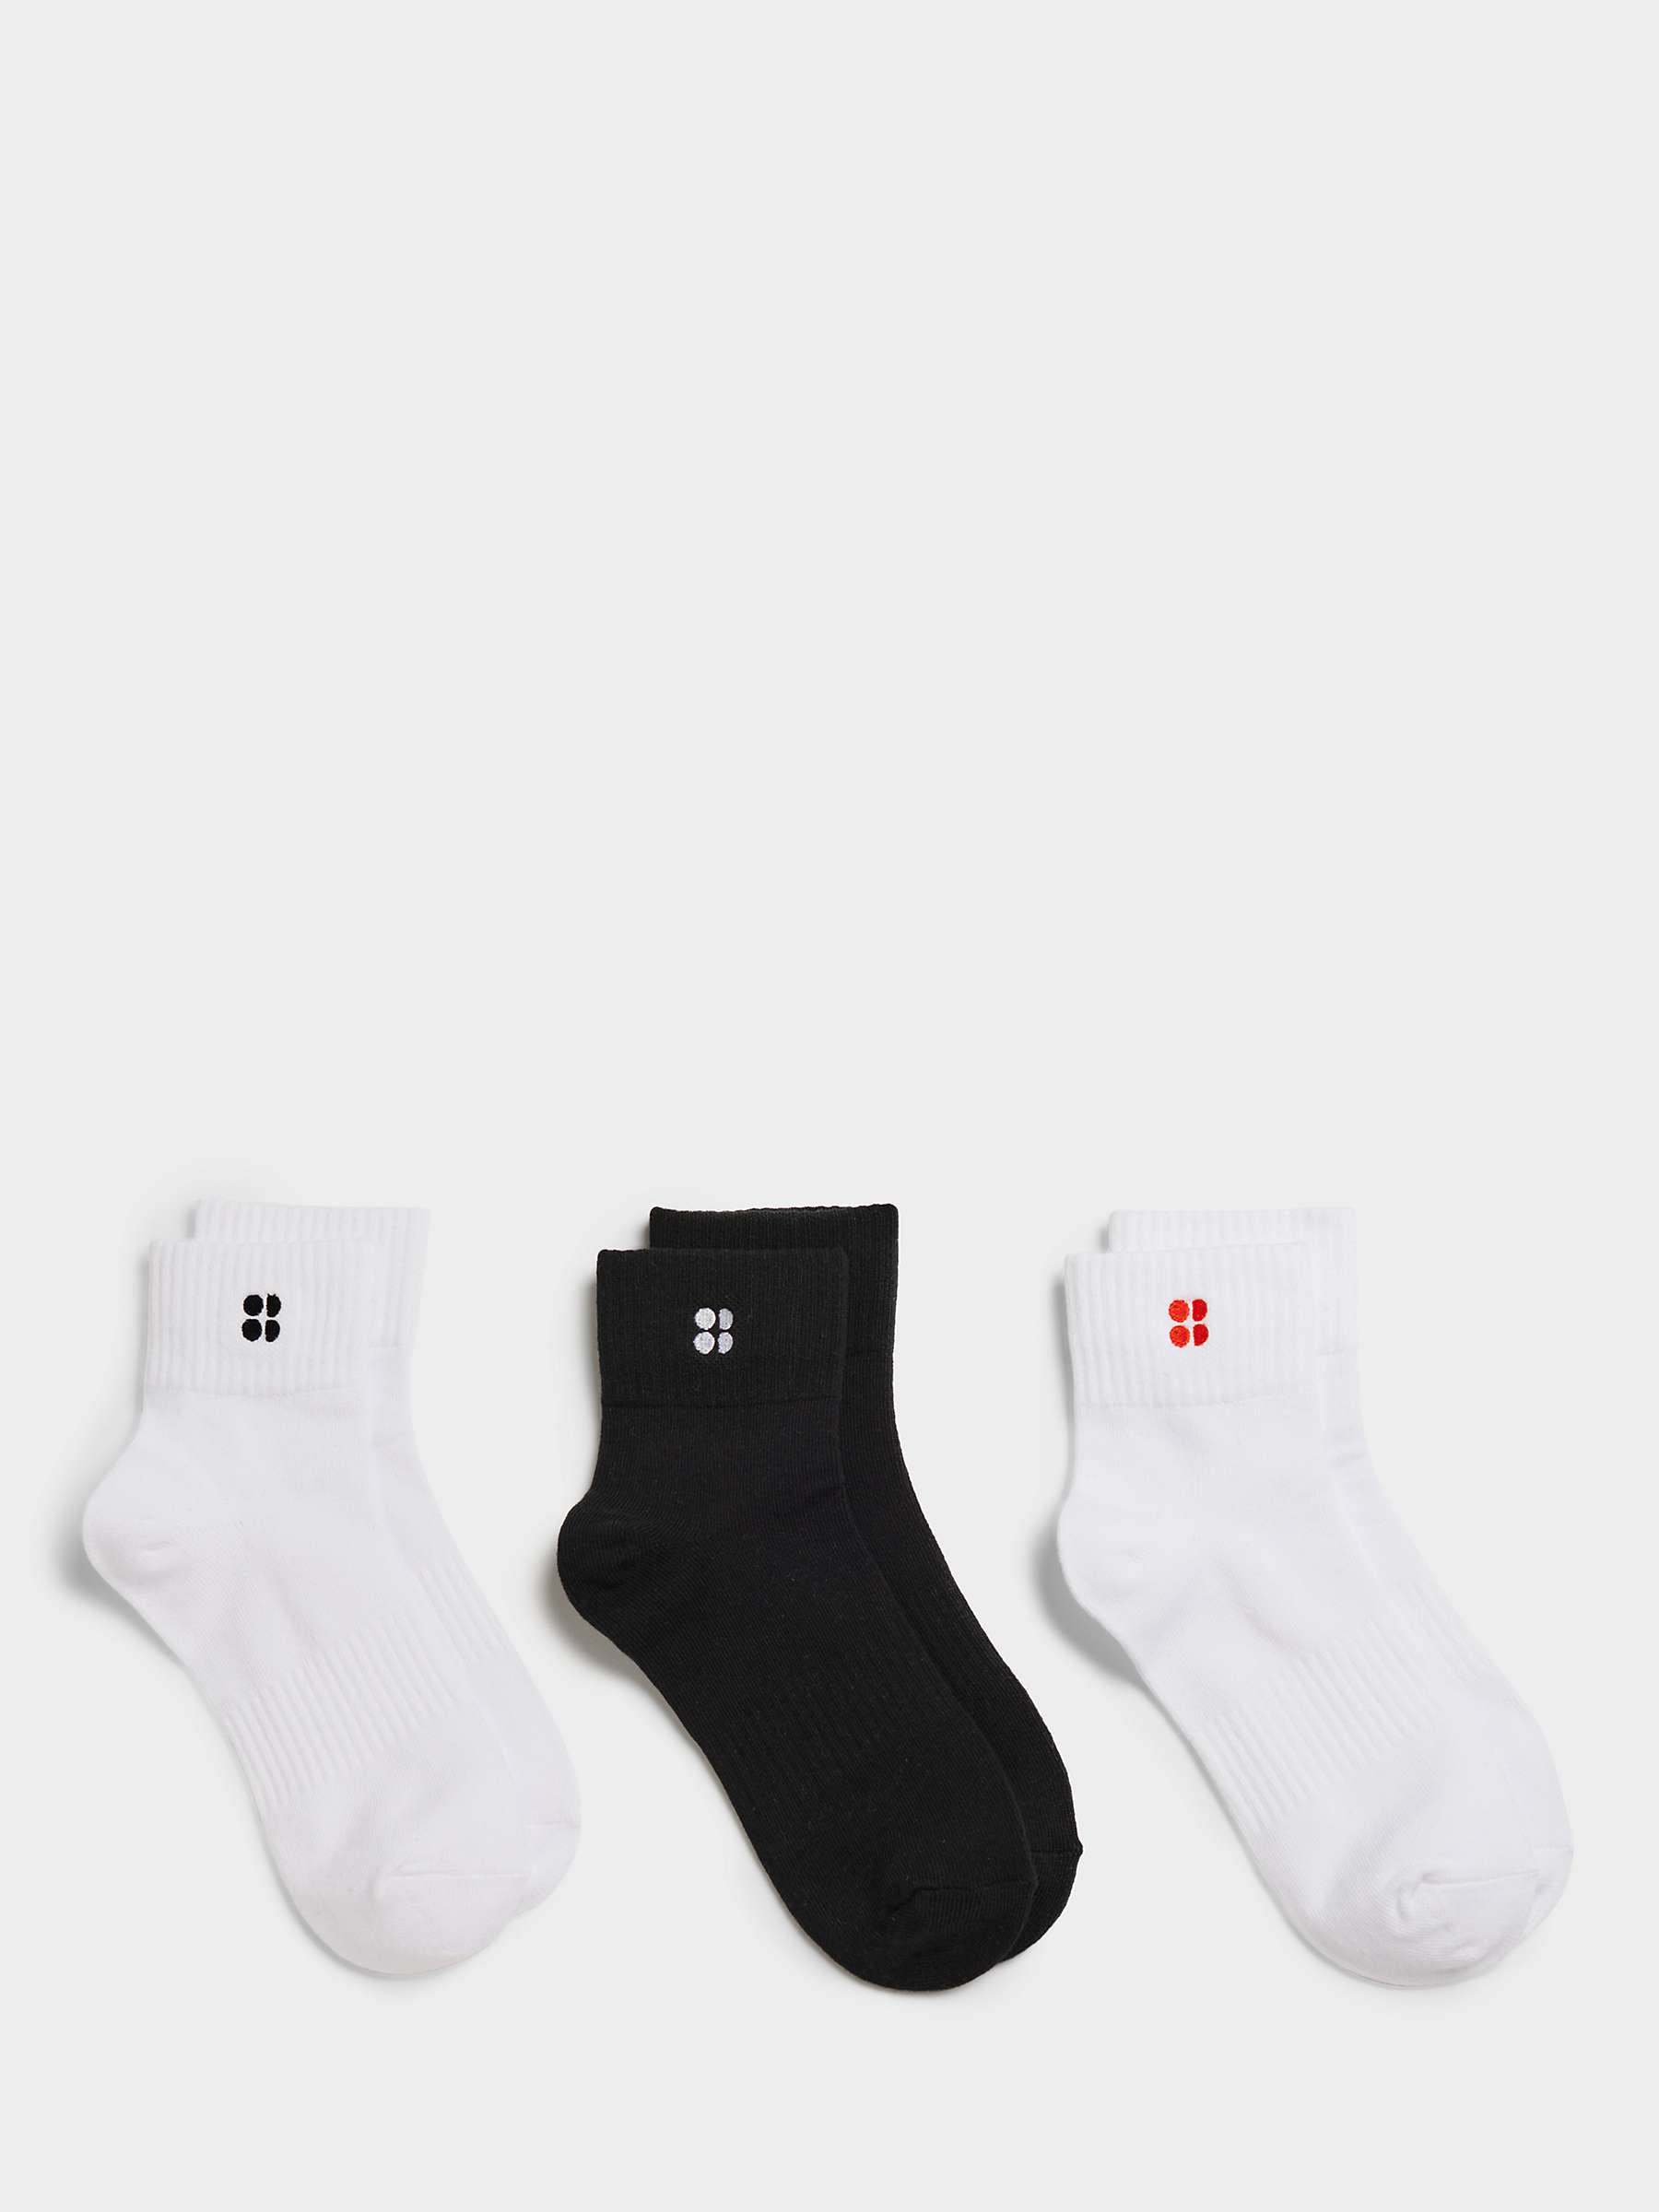 Buy Sweaty Betty Essentials Ankle Socks, Pack of 3 Online at johnlewis.com